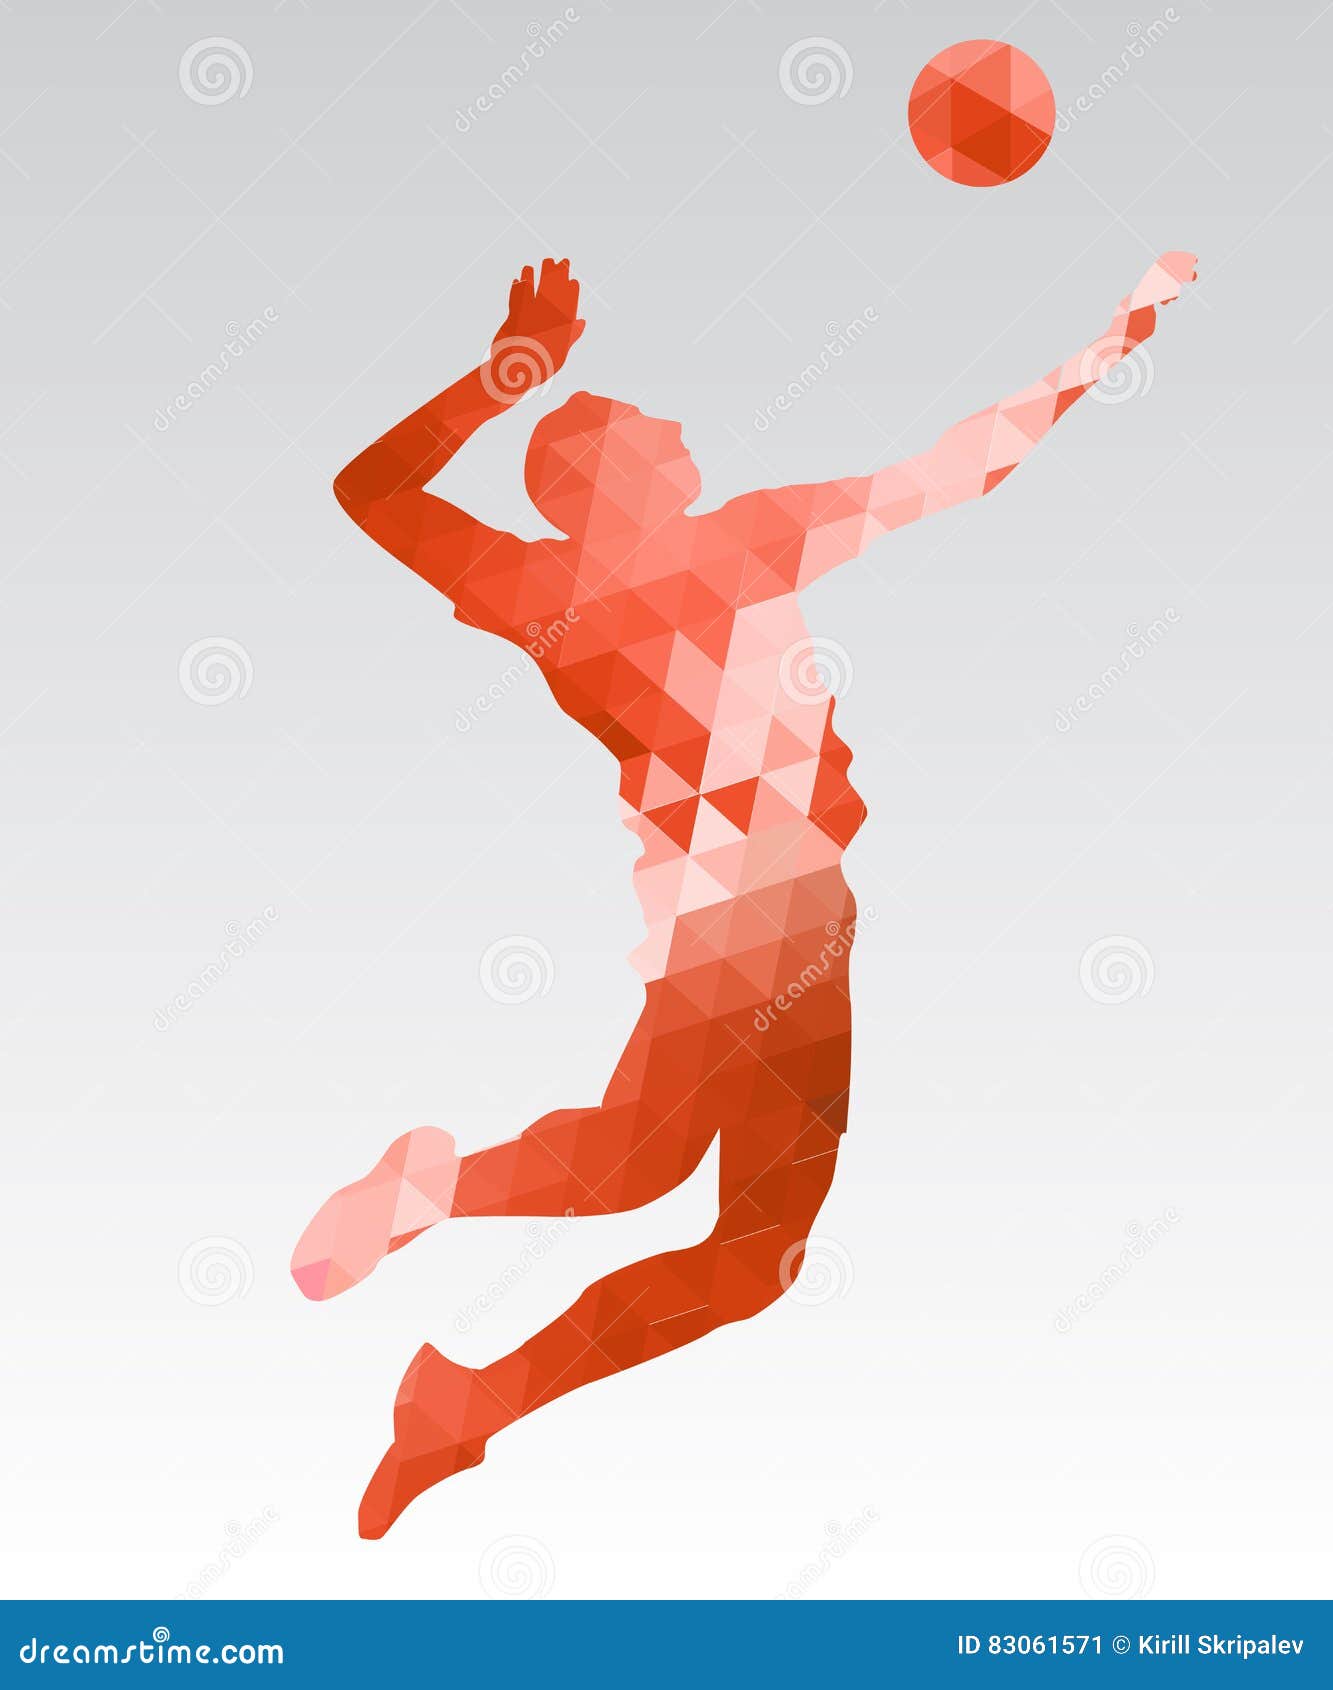 Abstract Triangle Volleyball Player Silhouette Stock Vector ...